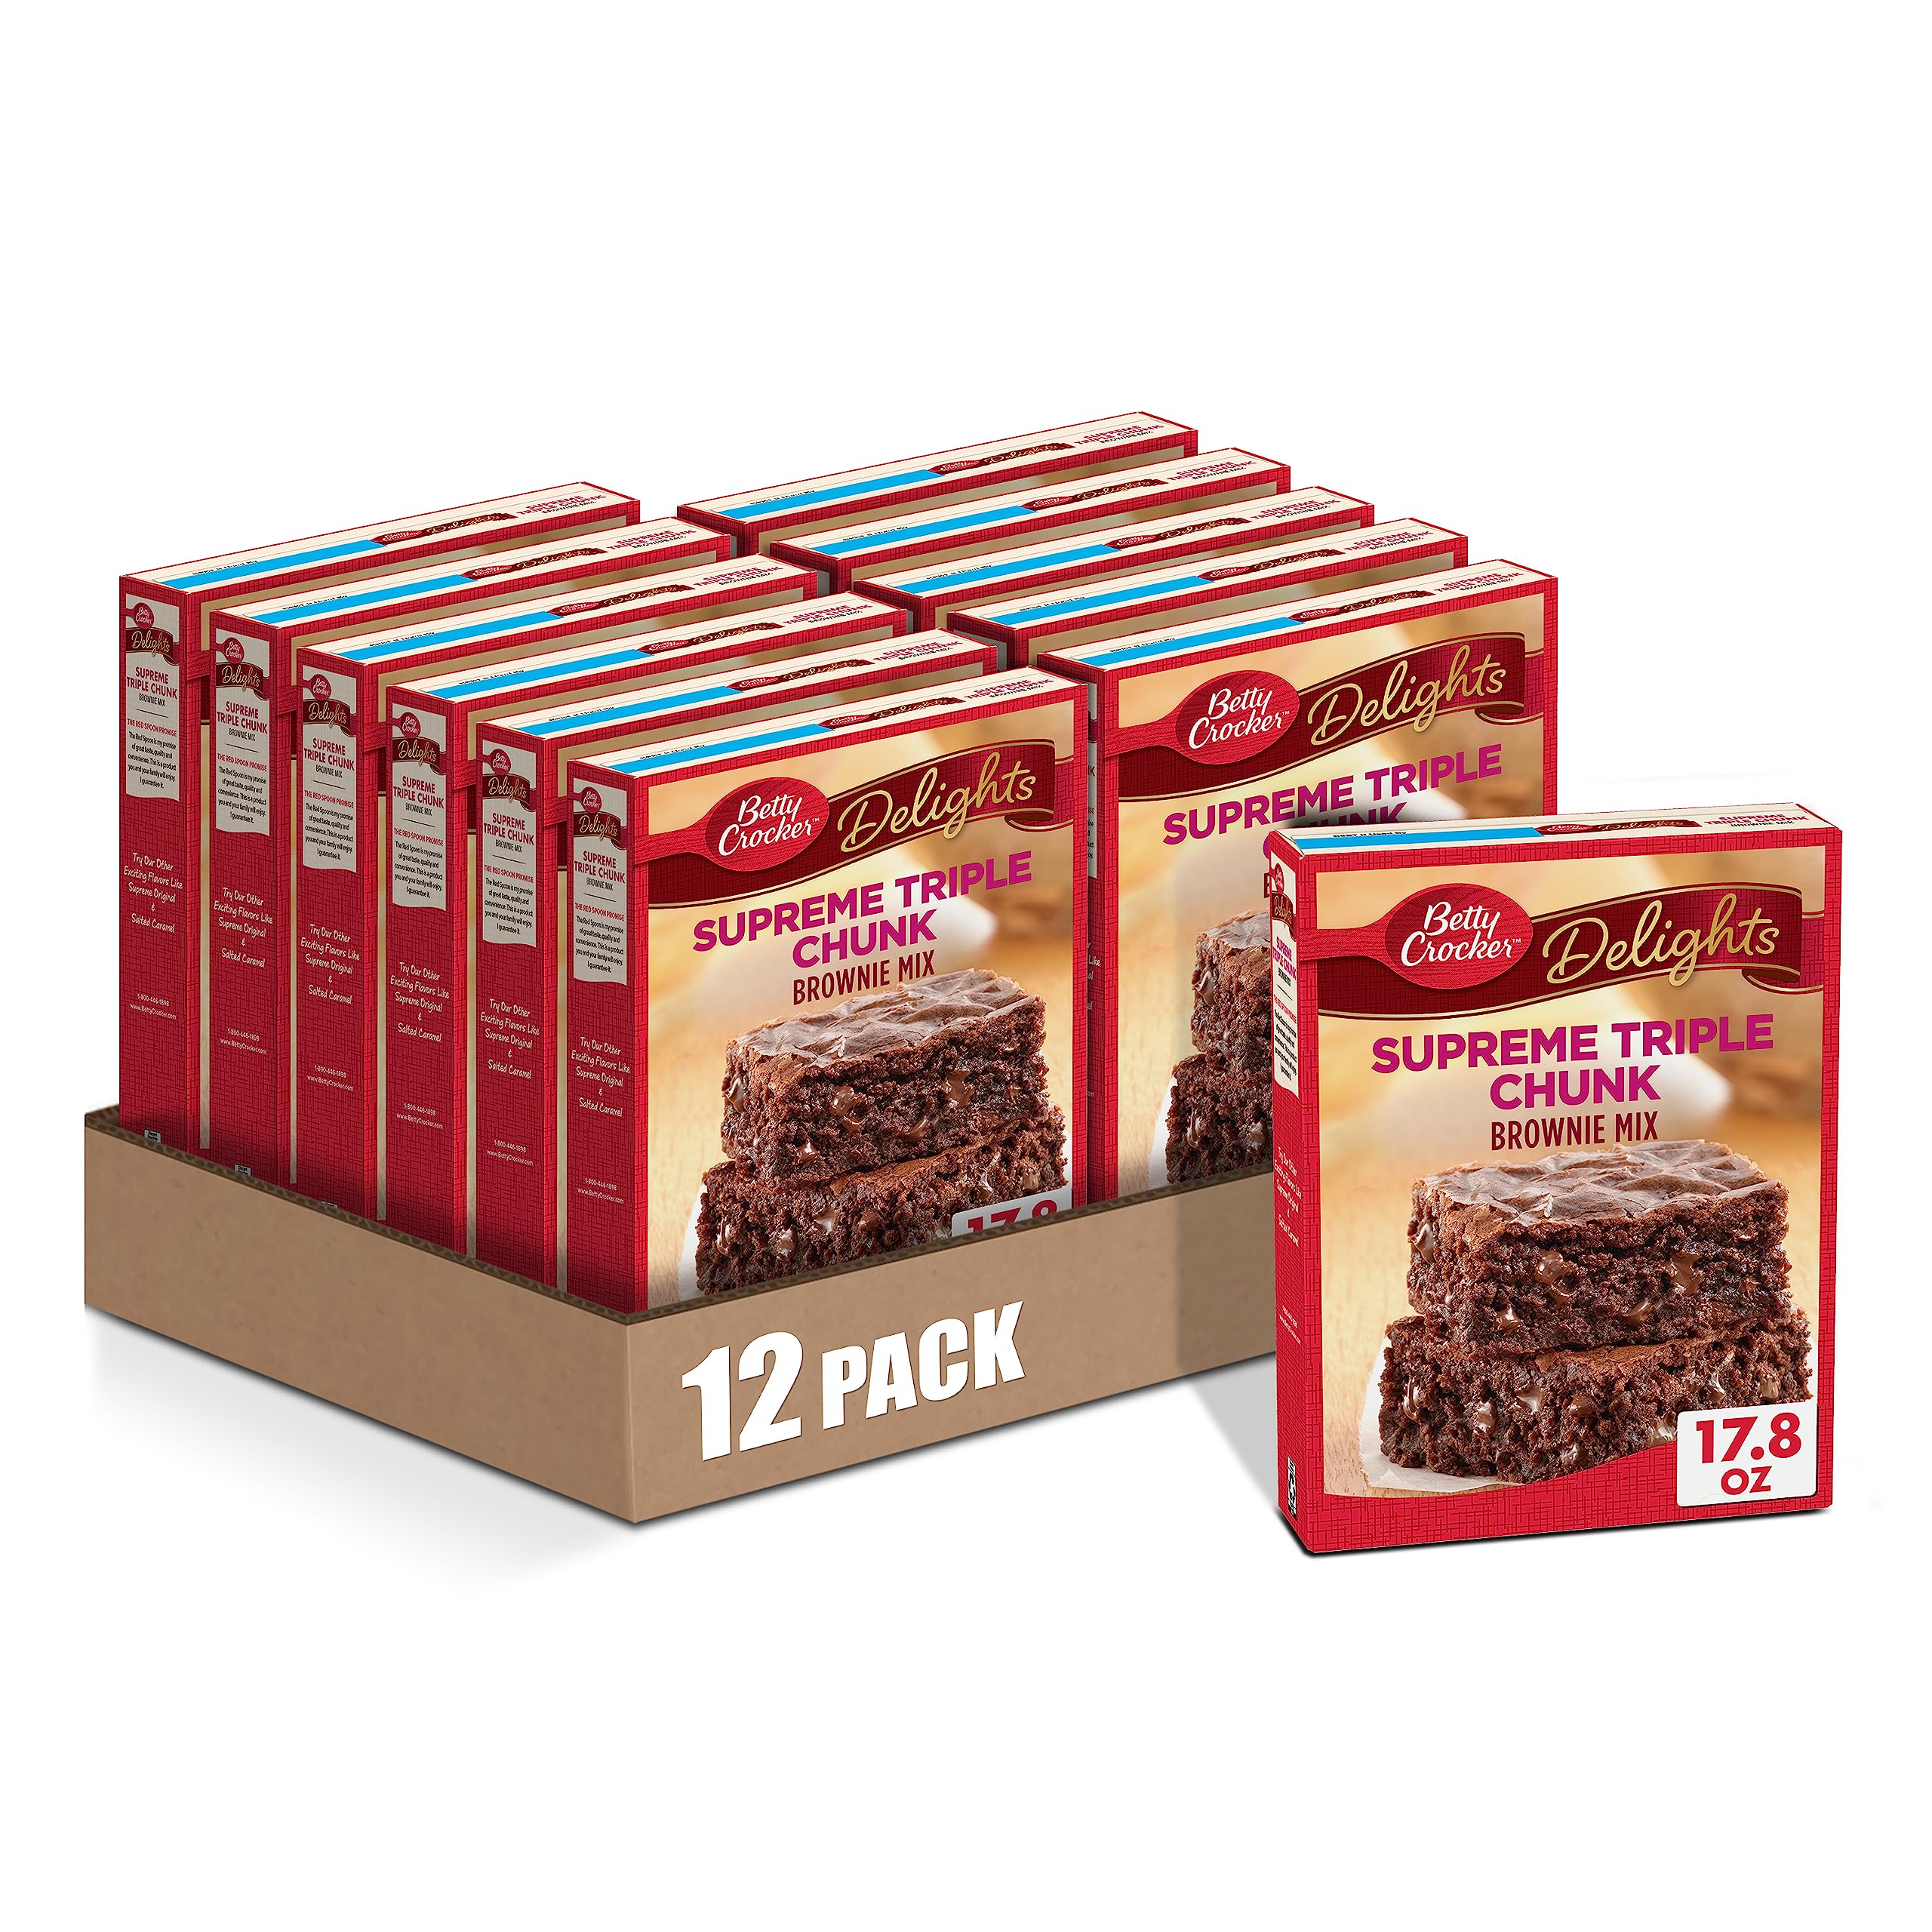 12-Pack 17.8-Oz. Betty Crocker Delights Triple Chunk Supreme Brownie Mix $18.50 ($1.55 each) w/ S&S + Free Shipping w/ Prime or on $35+